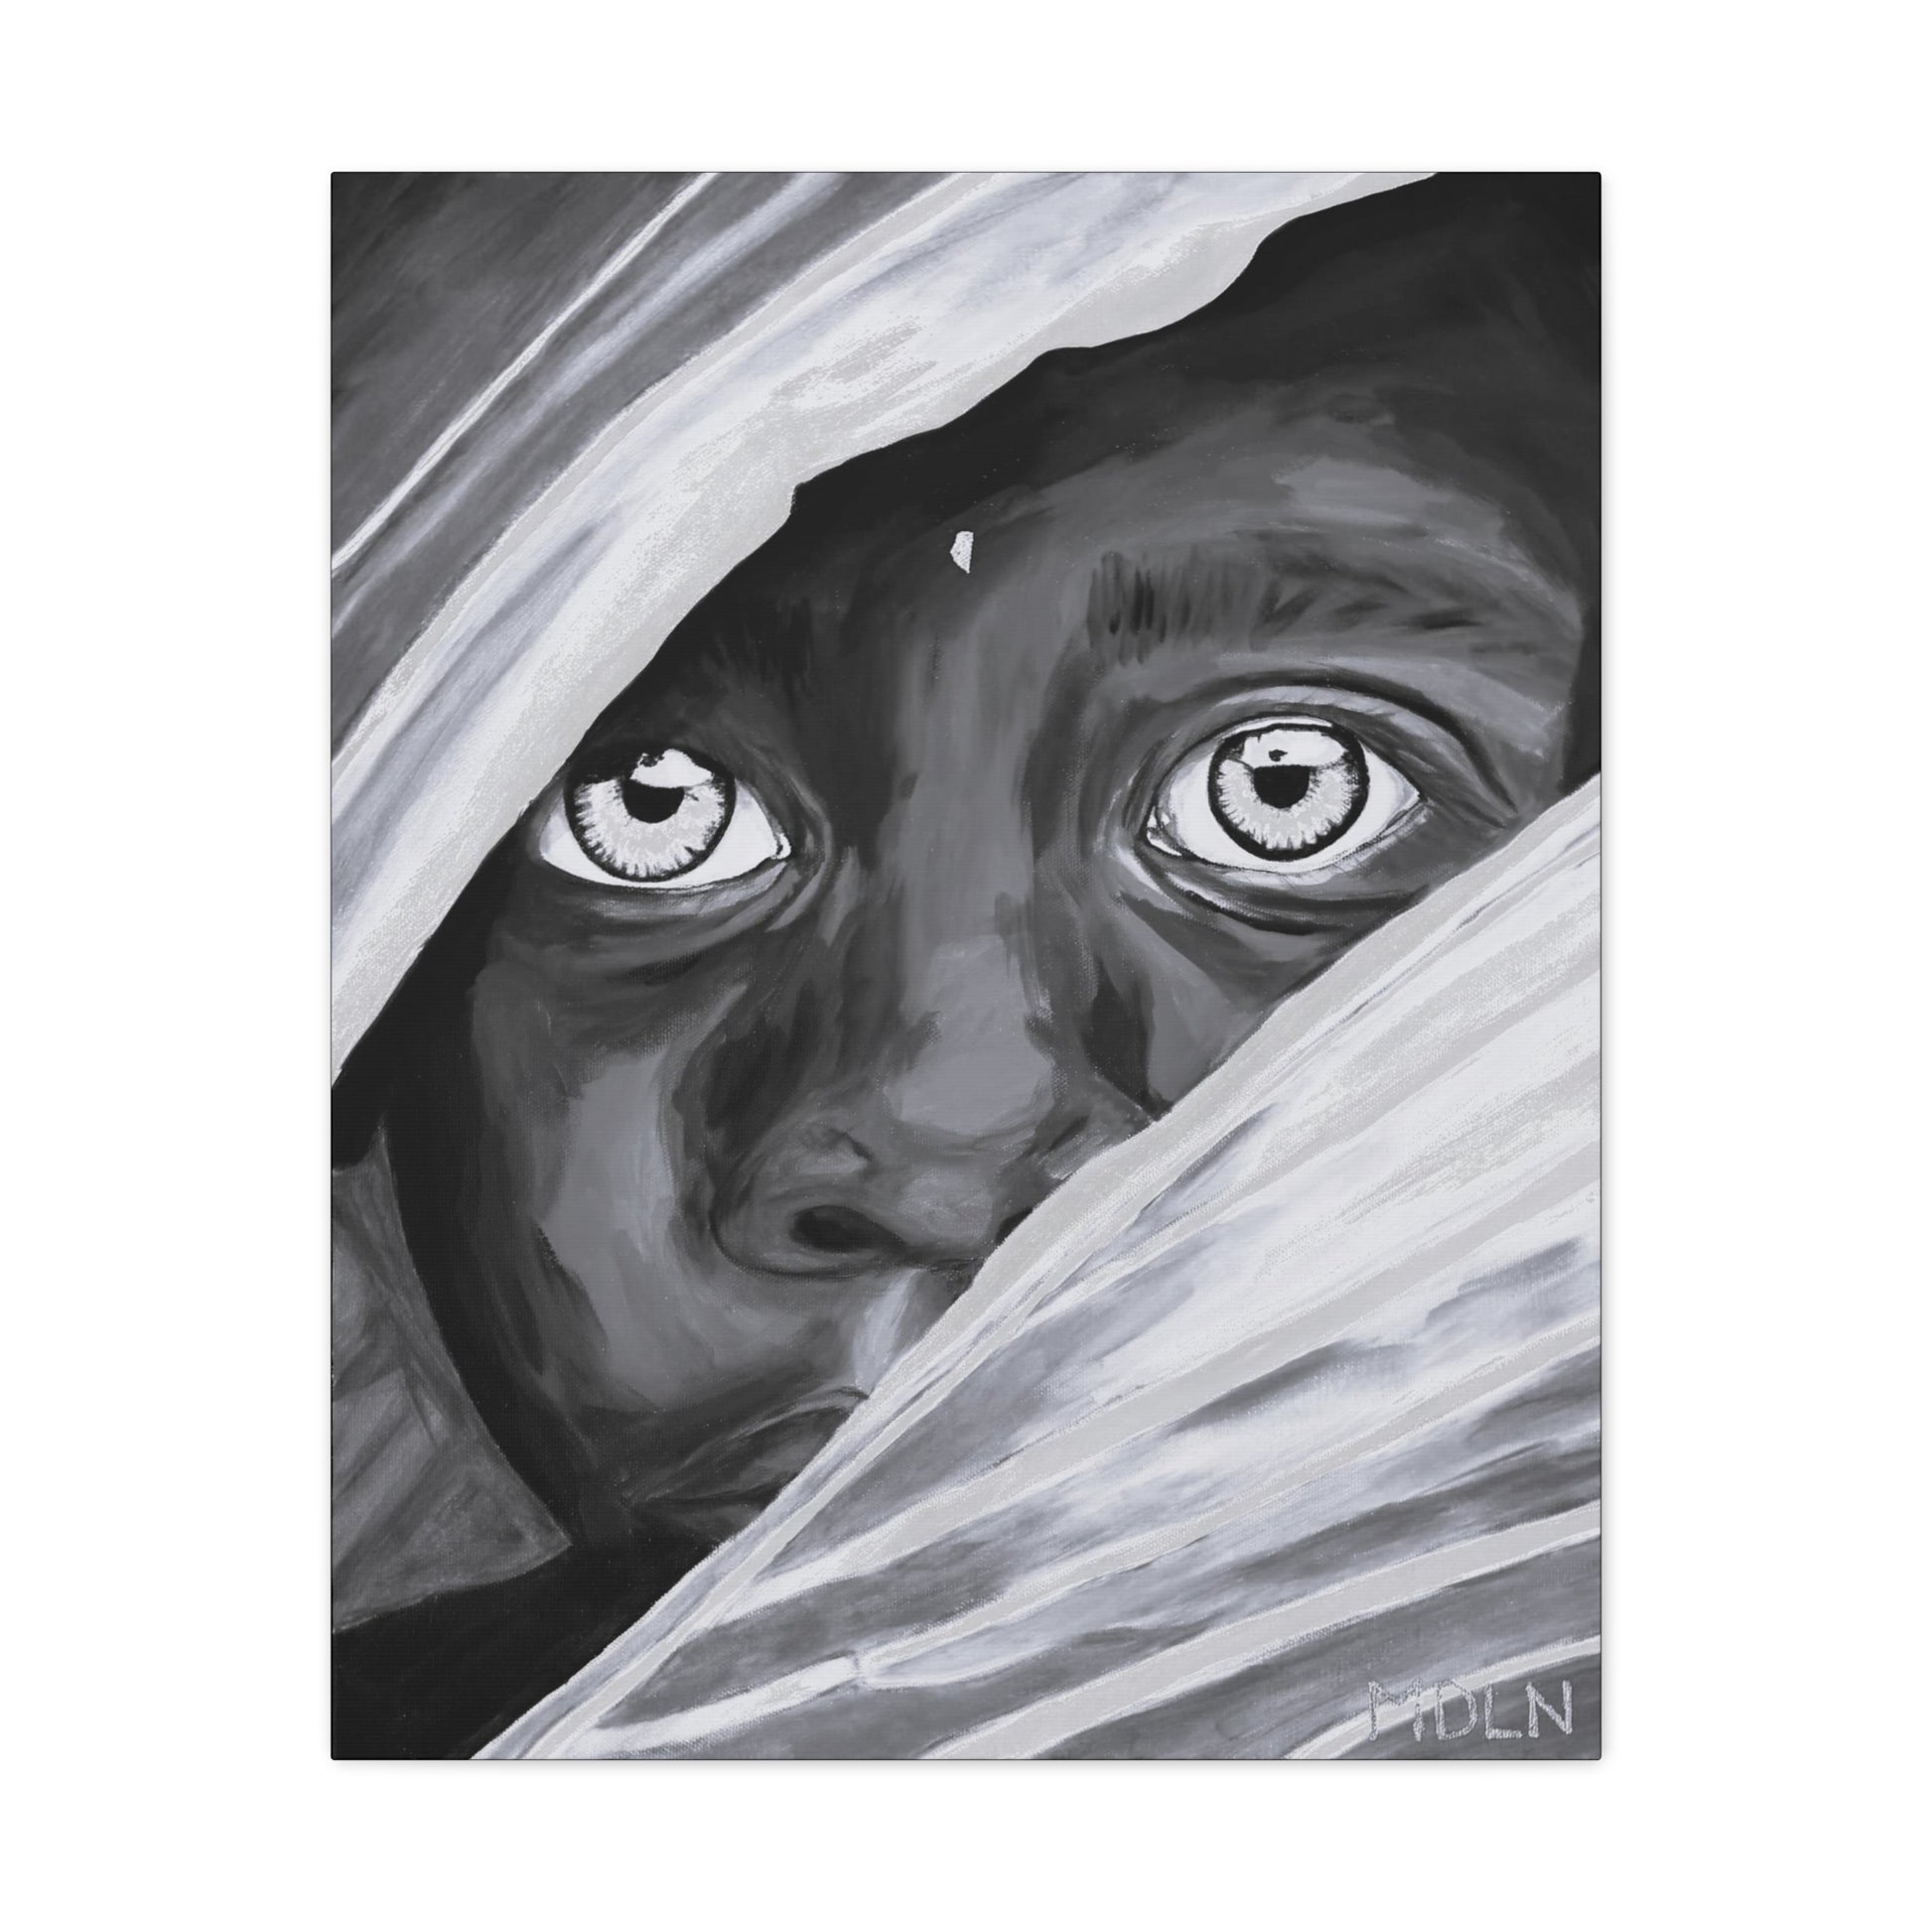 A black and white art print on canvas of an African Boy with eyes wide open cautiously peaking out from behind palm leaves